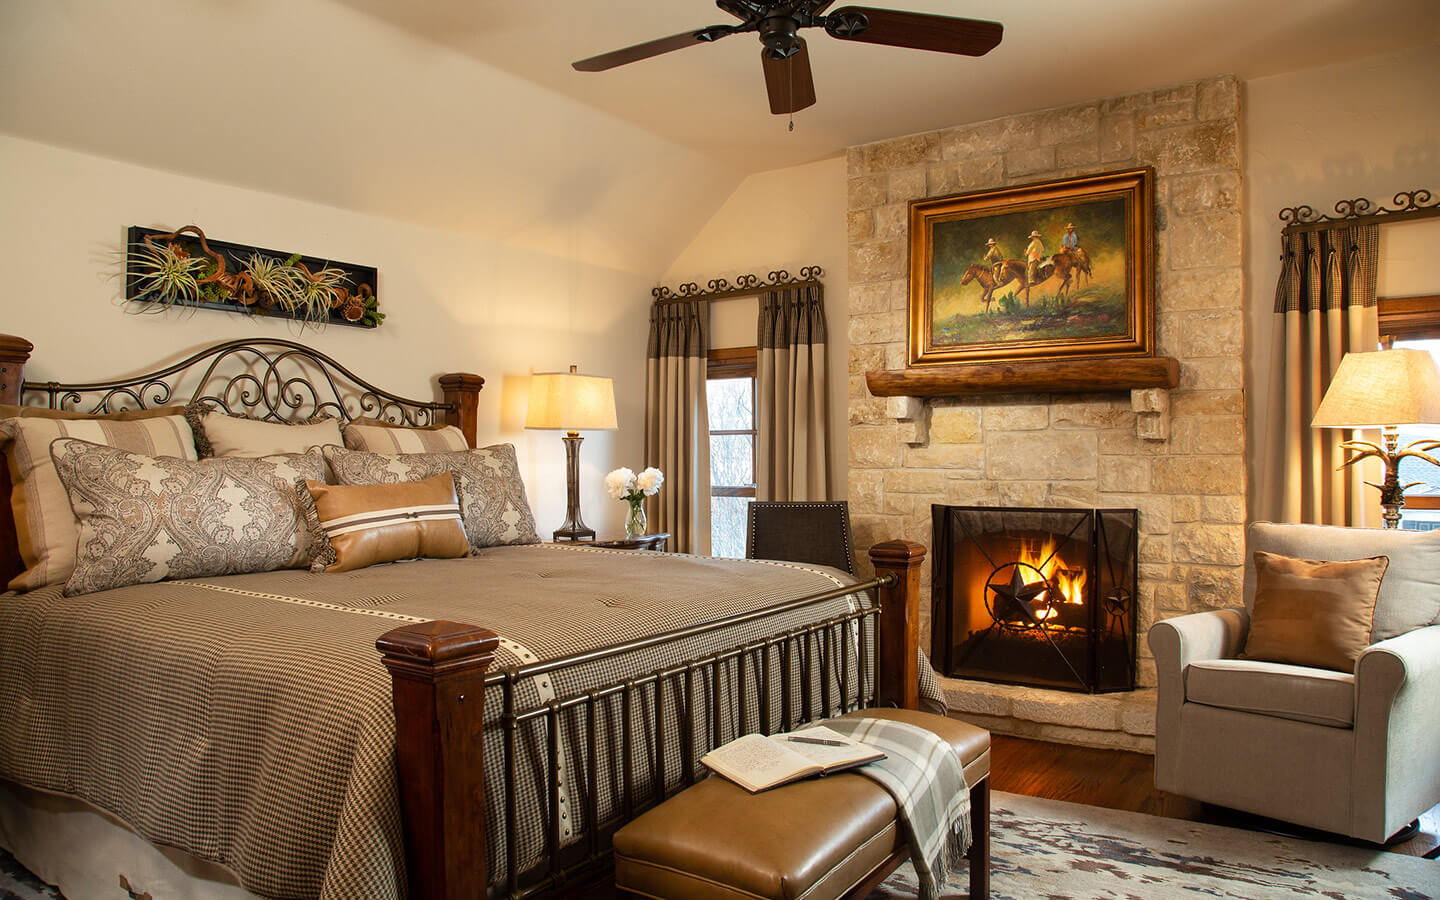 Texas Star Room bed and fireplace